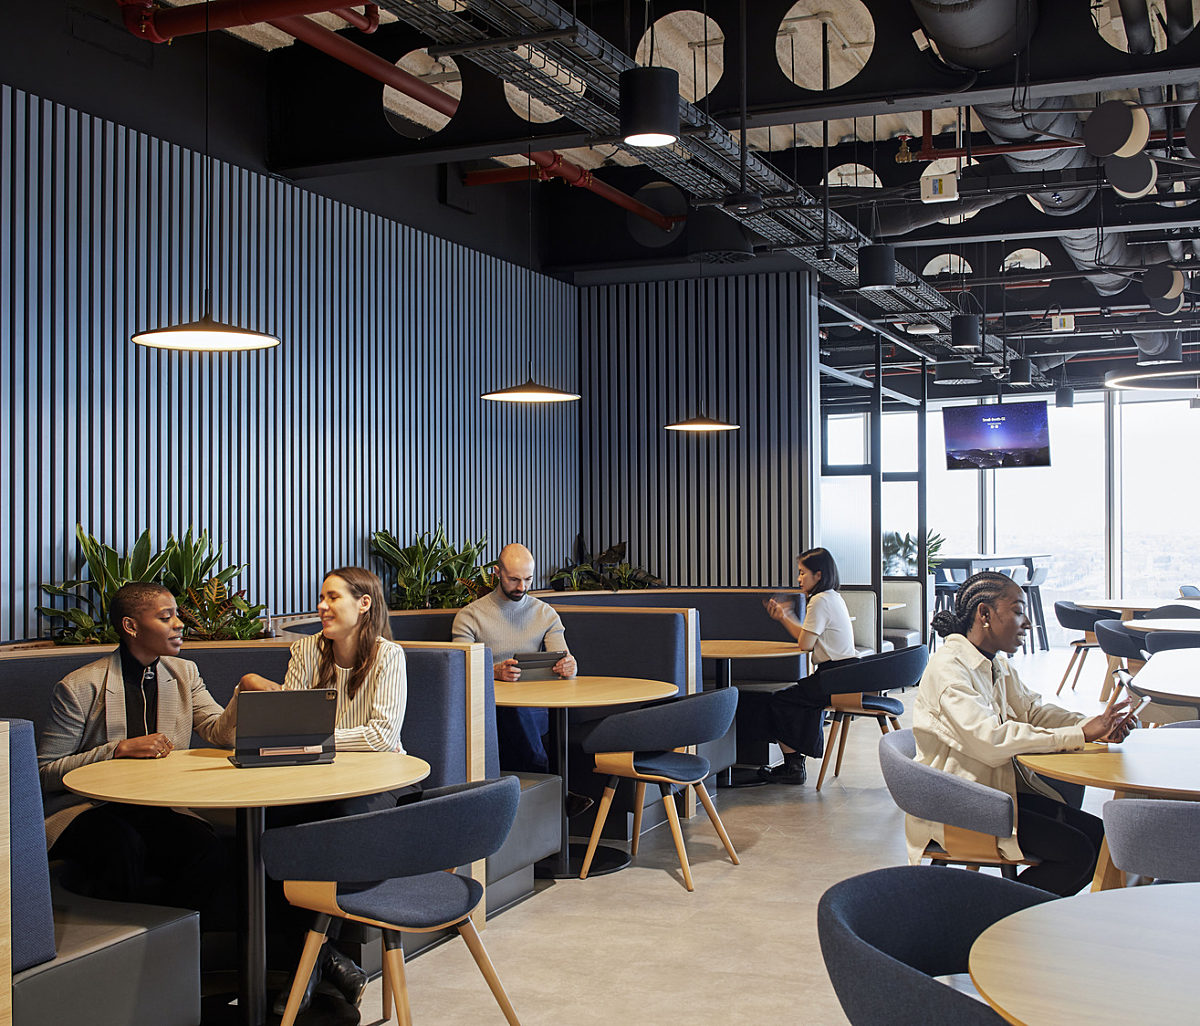 BT staff cafe with light channels and natural light